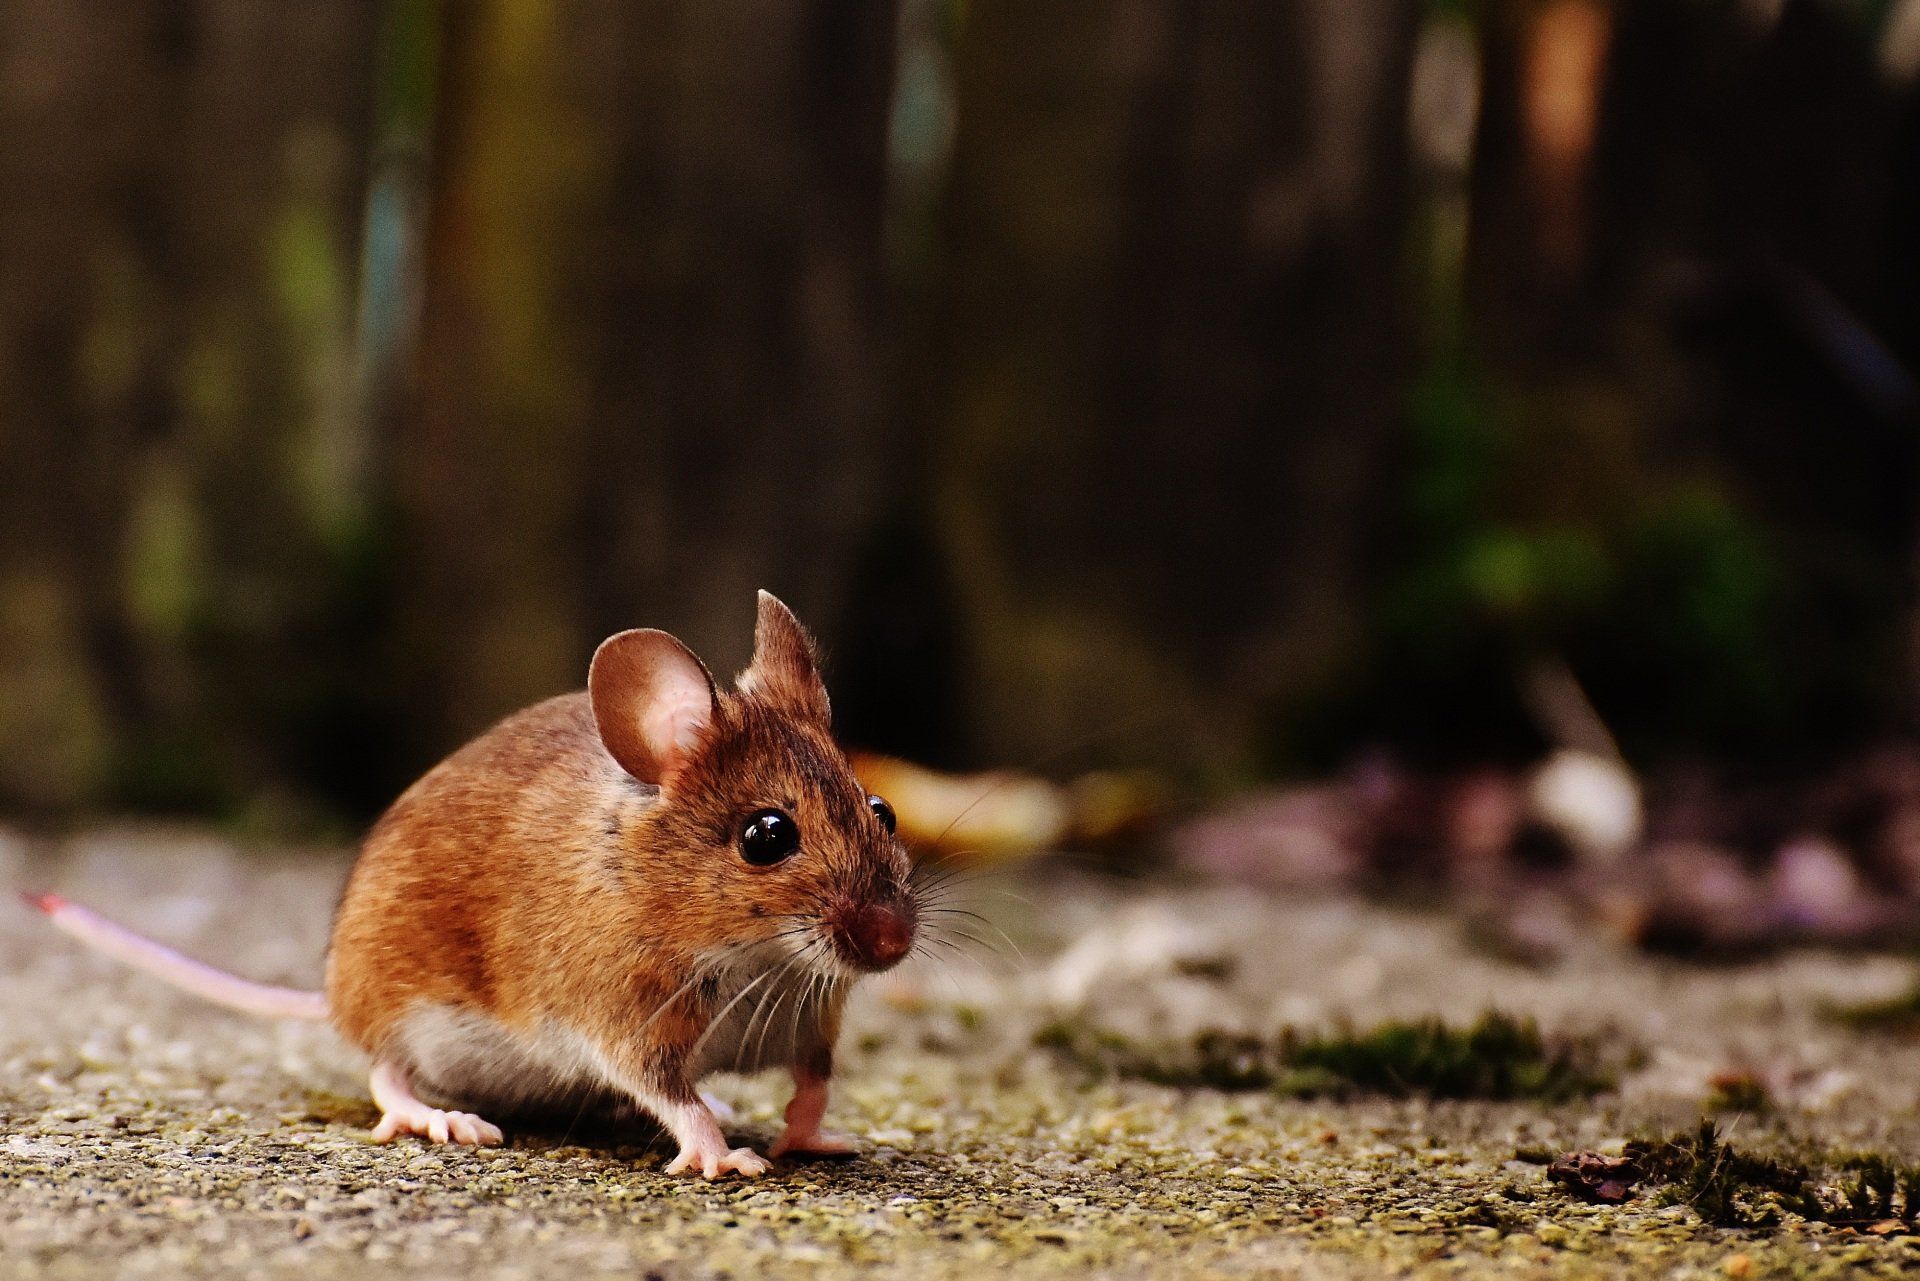 a small brown mouse standing on the ground looking at the camera